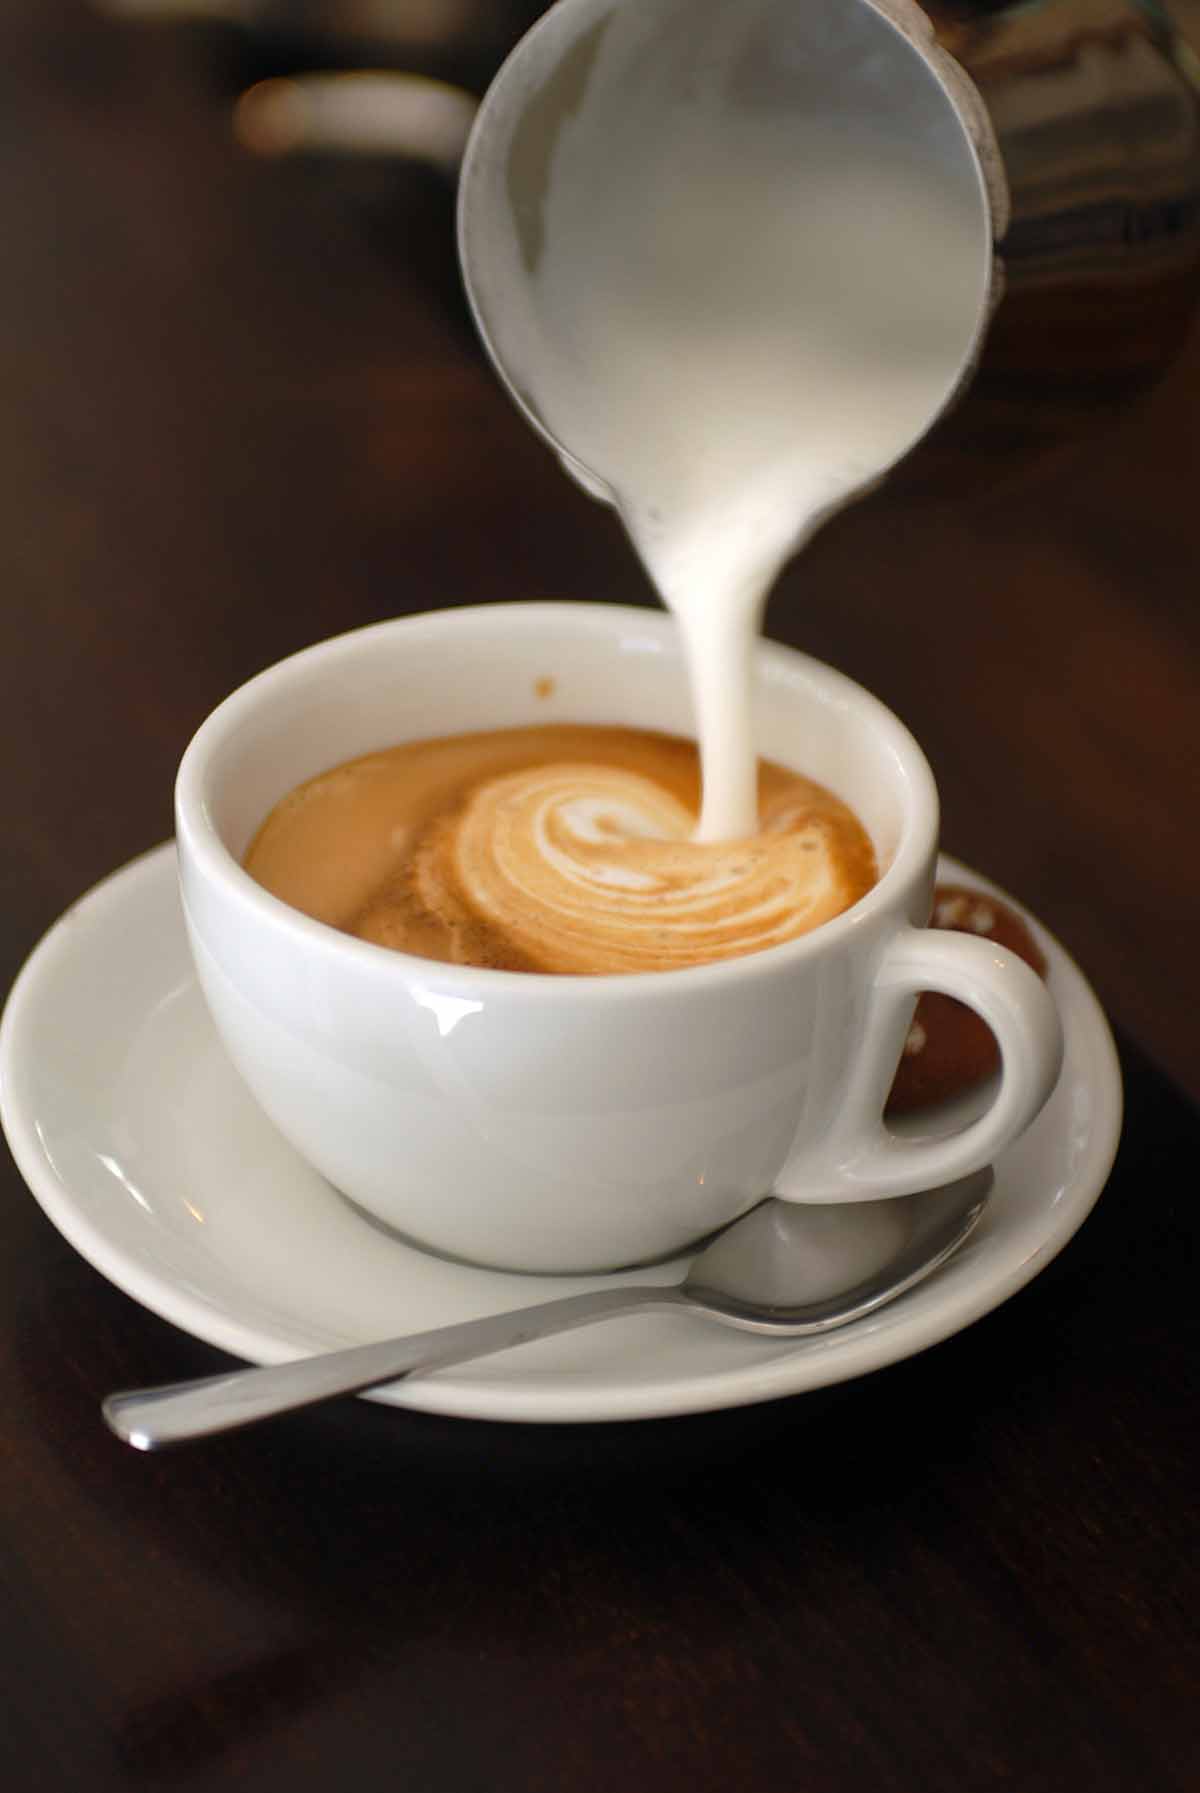 A cup of cappuccino on a saucer with milk being poured into it.